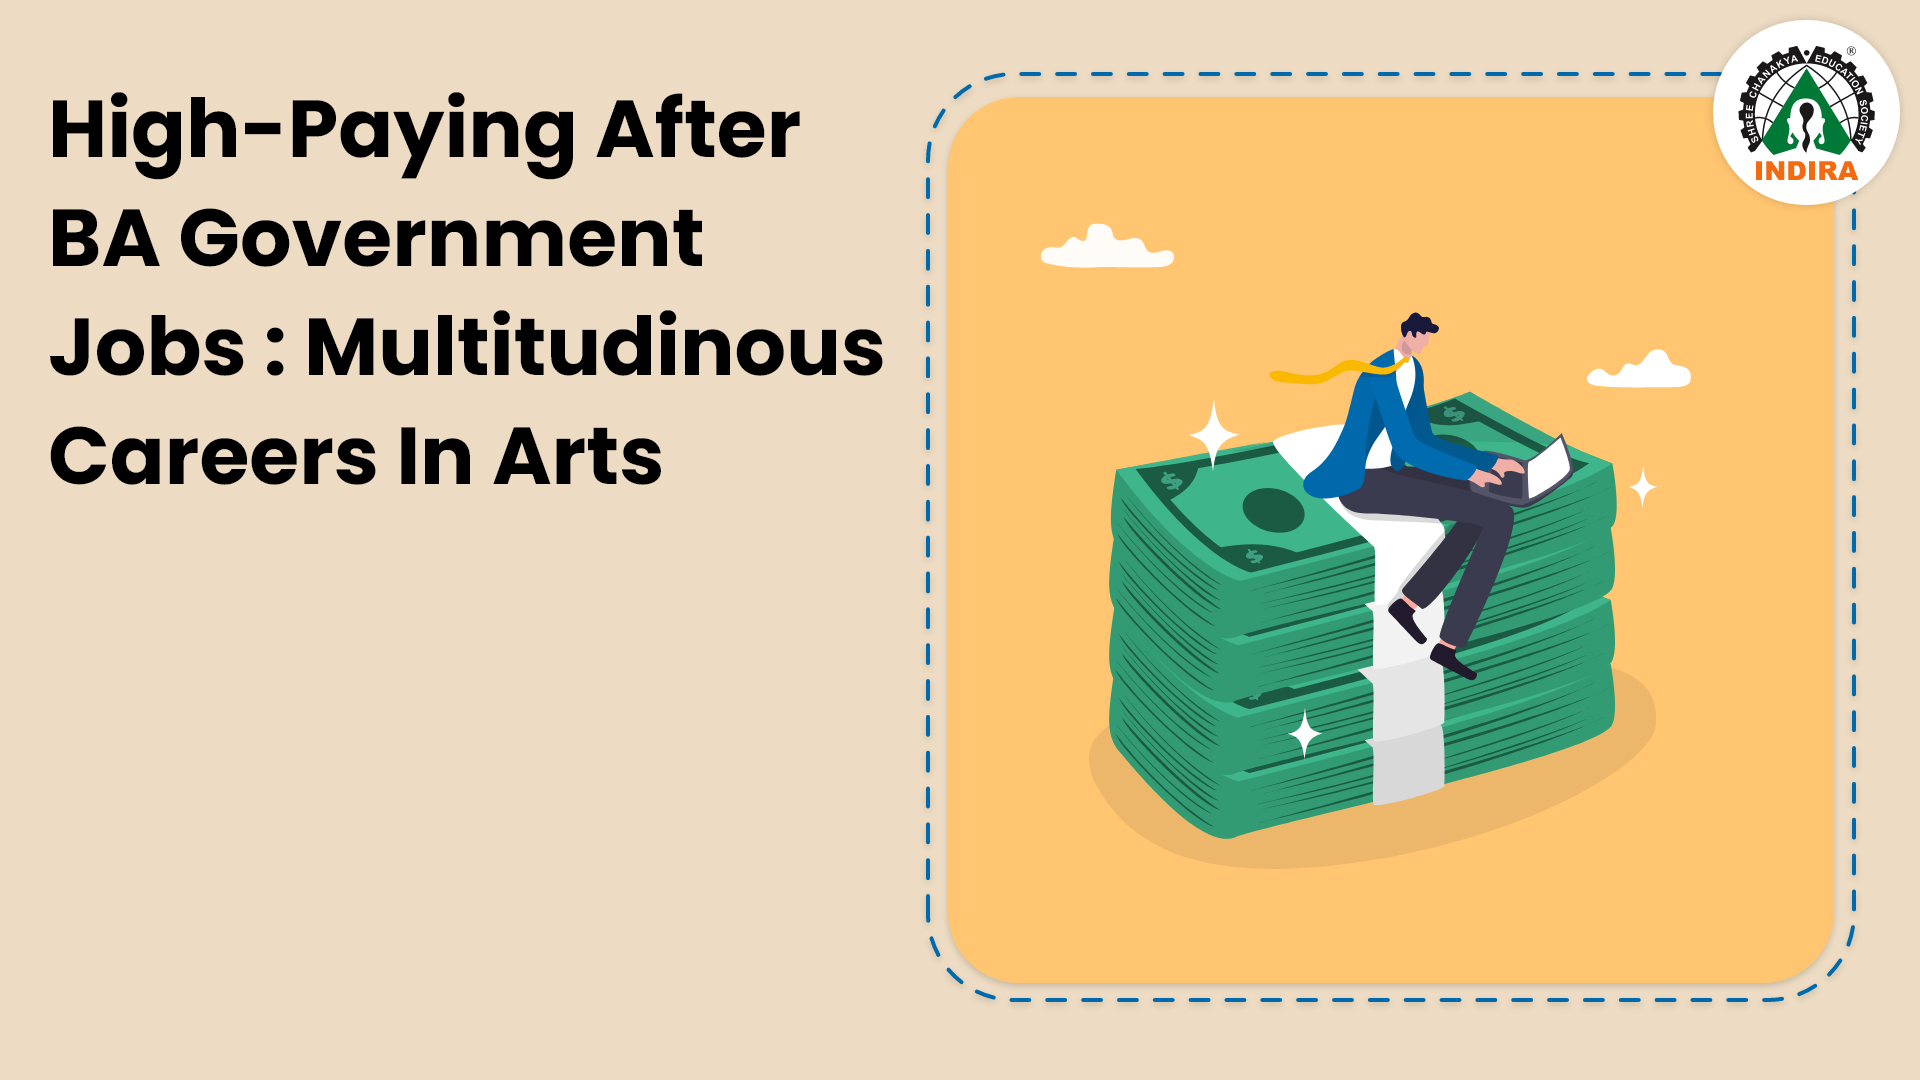 High-Paying After BA Government Jobs: Multitudinous Careers in Arts